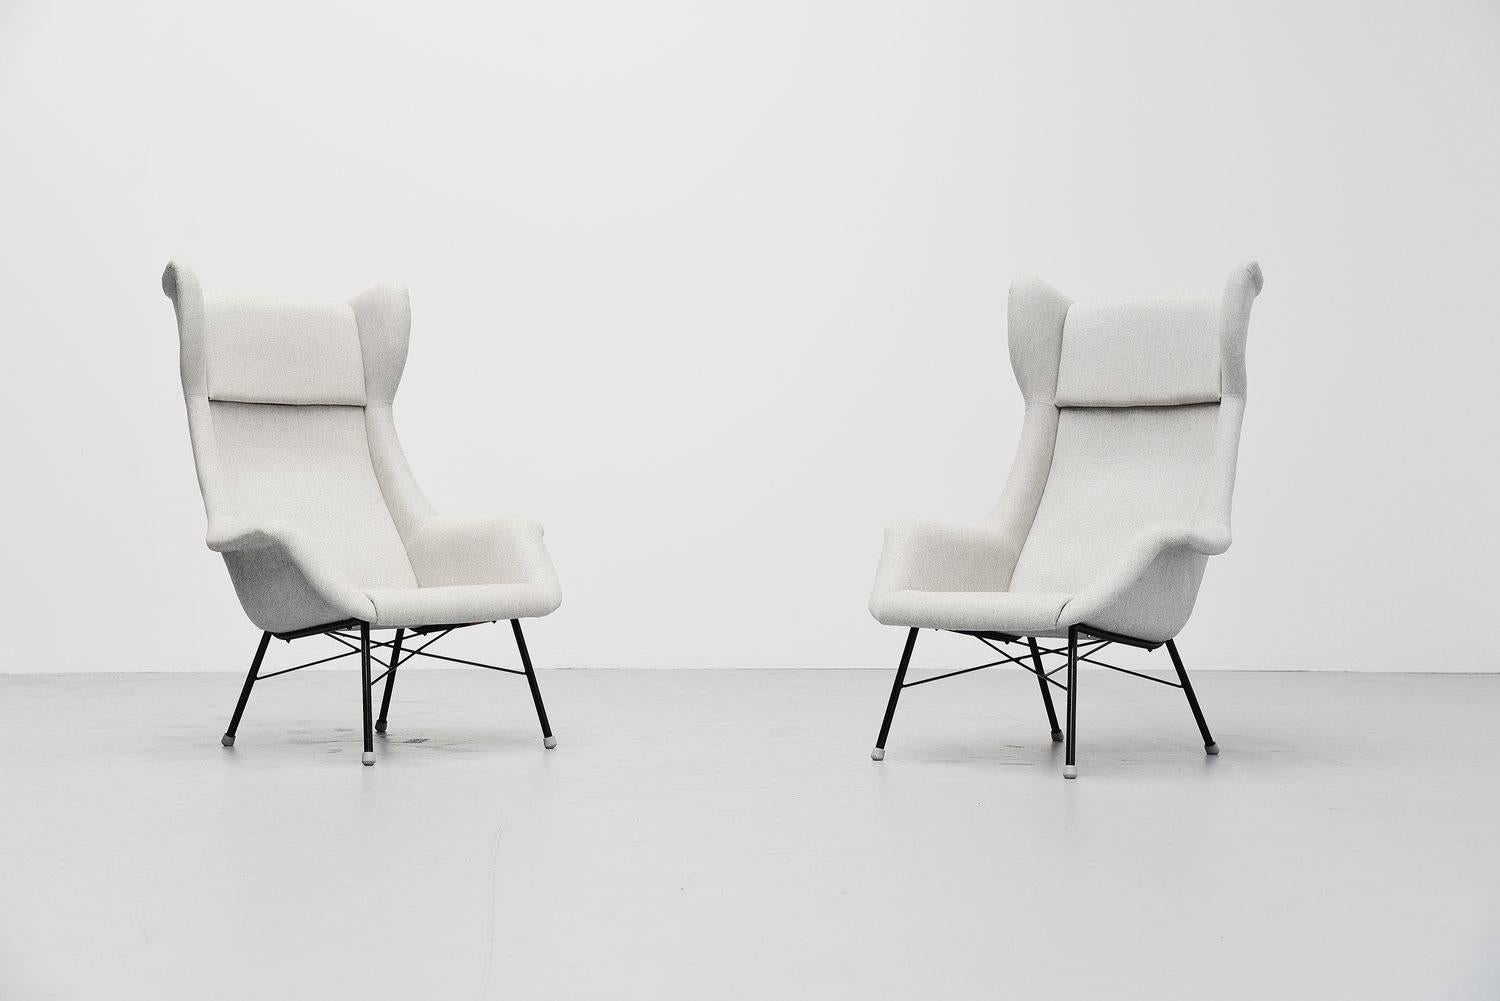 Fantastic pair of wingback lounge chairs designed by Miroslav Navratil, produced in own atelier in Czech Republic 1950. These chairs are like a mix of the Bovenkamp wingback chairs by Aksel Bender Madsen and the chairs by Augusto Bozzi for Saporiti.